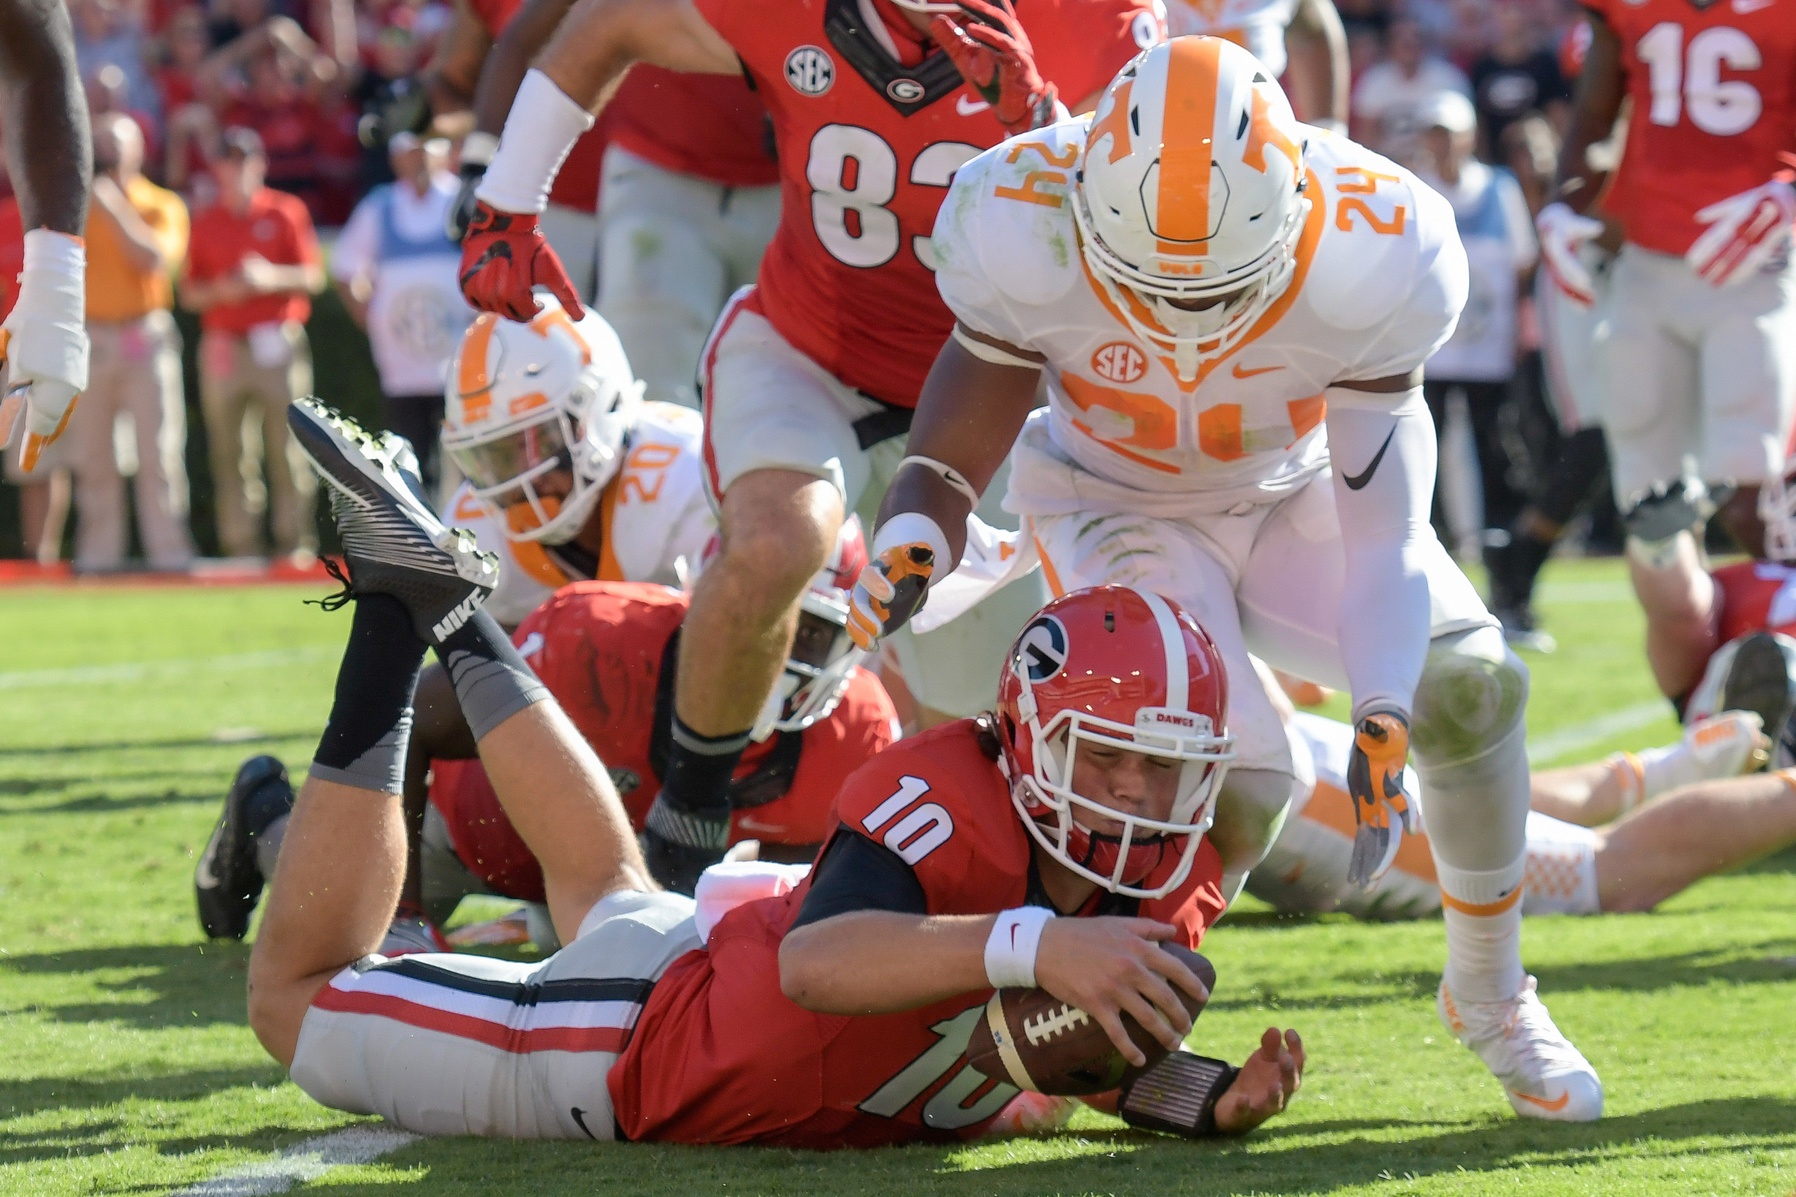 Oct 1, 2016; Athens, GA, USA; Georgia Bulldogs quarterback Jacob Eason (10) recovers a fumble by running back Sony Michel (not shown) for a Georgia touchdown against the Tennessee Volunteers during the second quarter at Sanford Stadium. Mandatory Credit: Dale Zanine-USA TODAY Sports